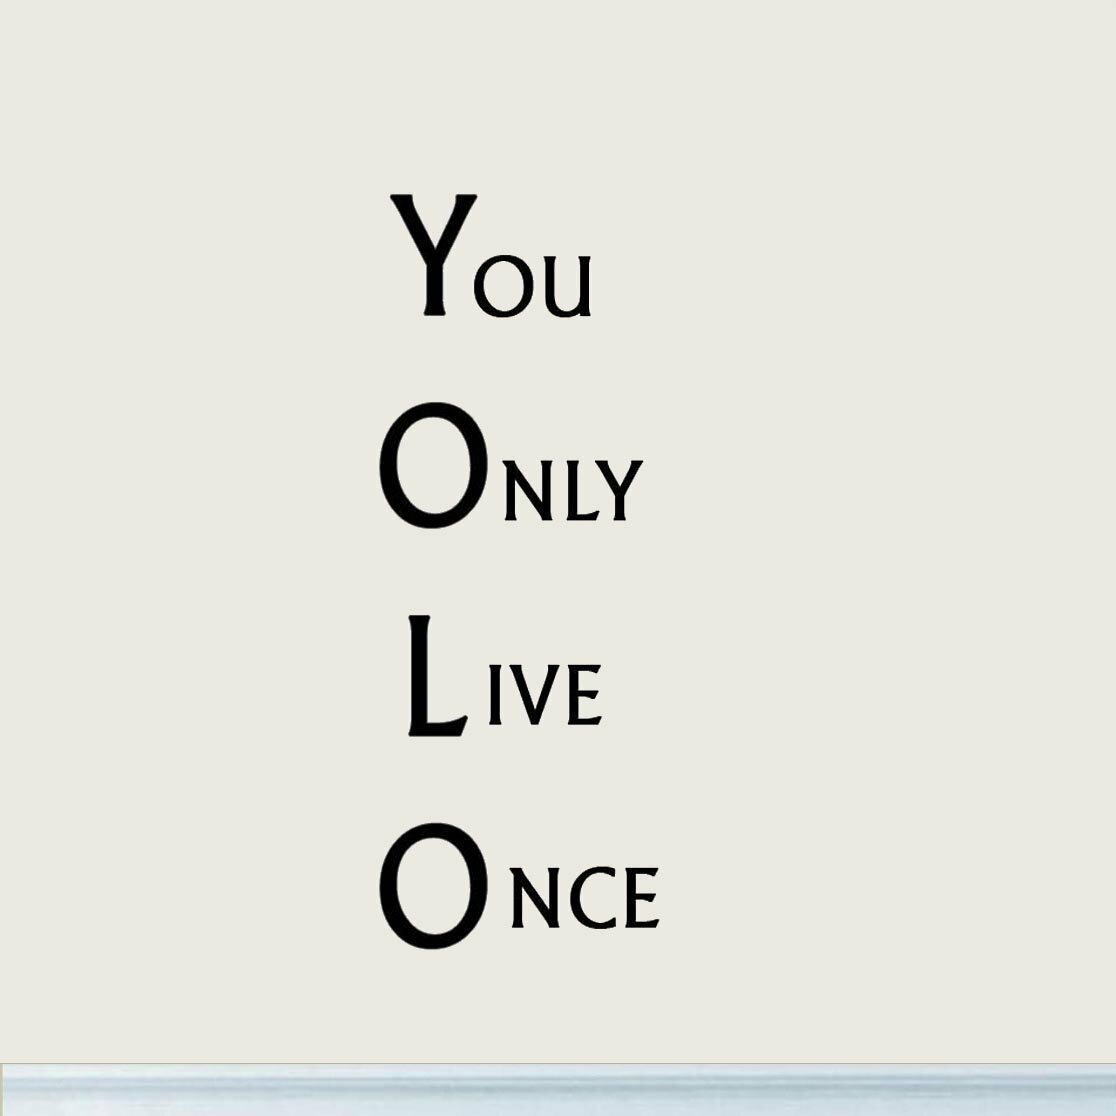 drumroan-yolo-you-only-live-once-wall-decal.jpg